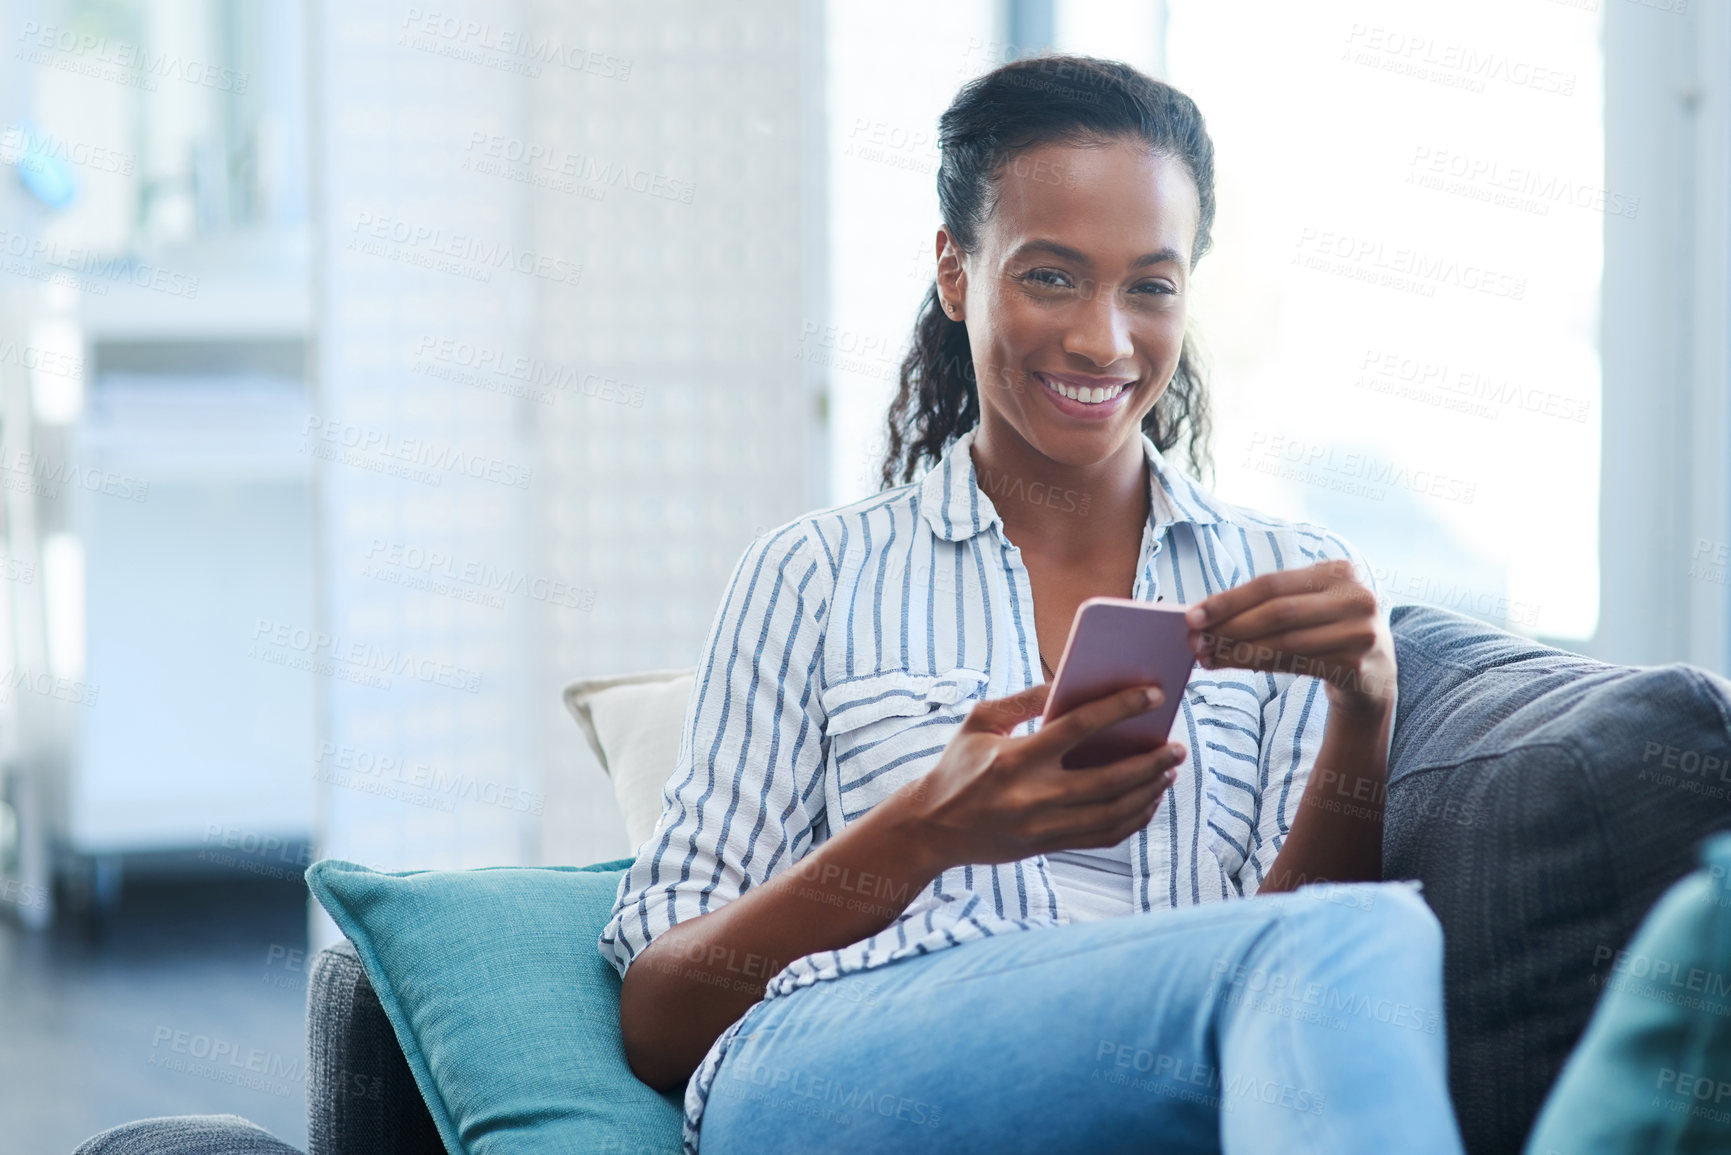 Buy stock photo Portrait of a young woman texting on a cellphone at home